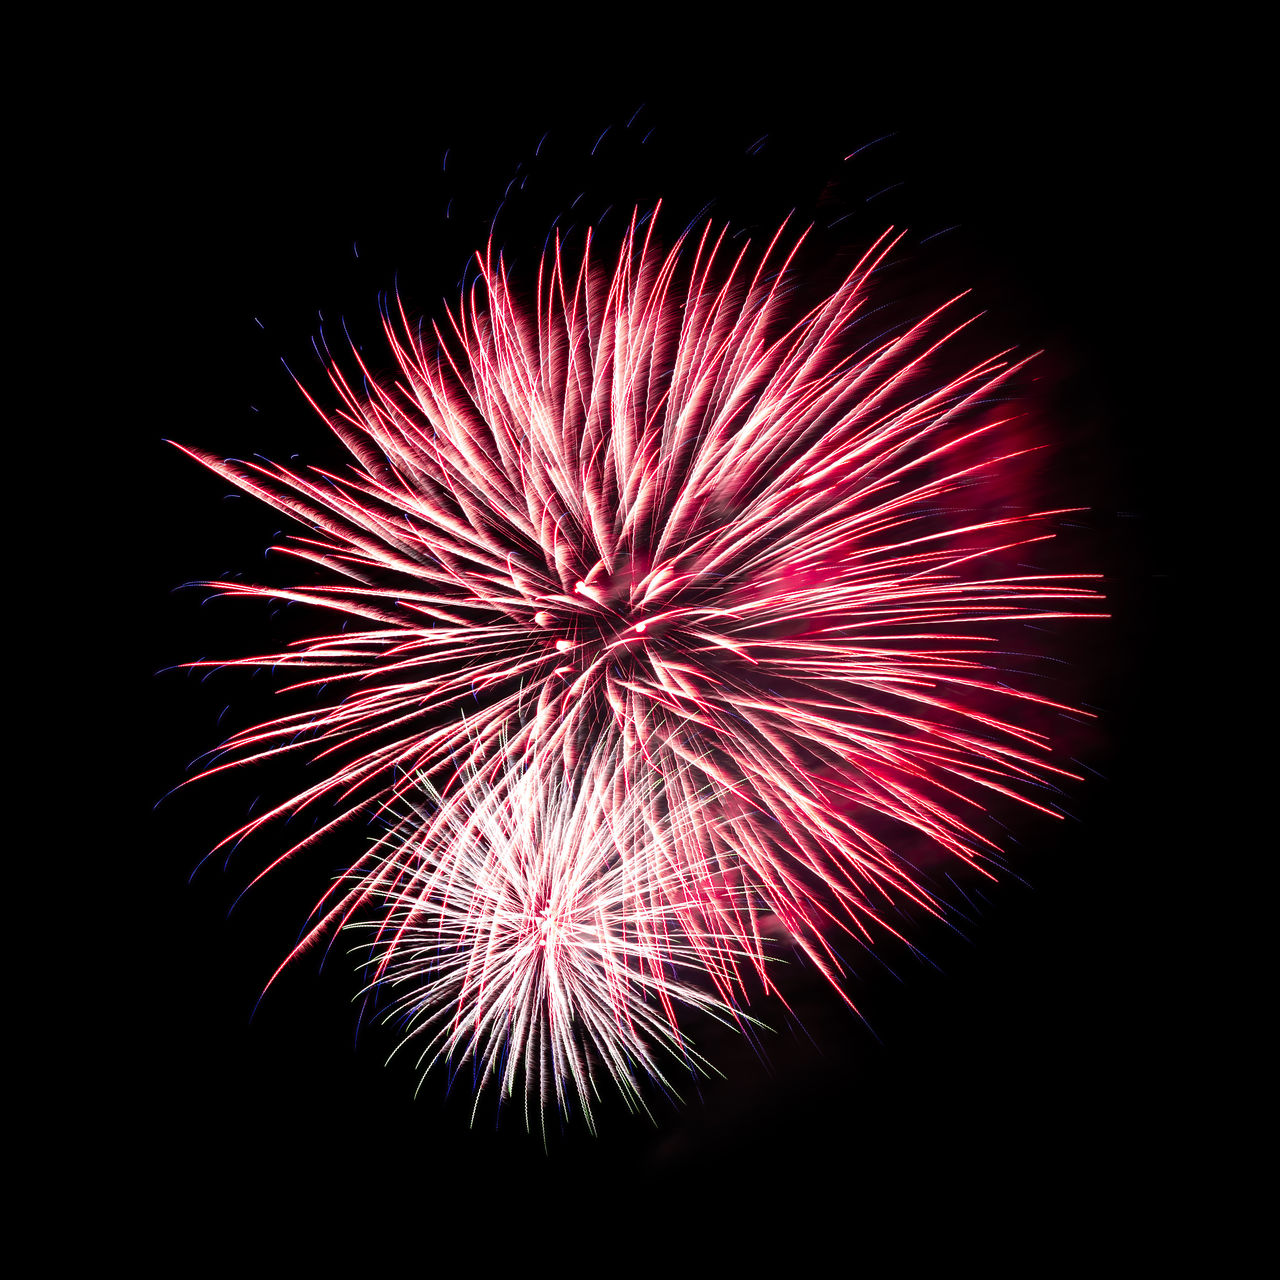 fireworks, firework display, celebration, exploding, motion, event, night, illuminated, arts culture and entertainment, recreation, no people, glowing, firework - man made object, sky, nature, multi colored, red, blurred motion, long exposure, black, low angle view, dark, outdoors, new year's eve